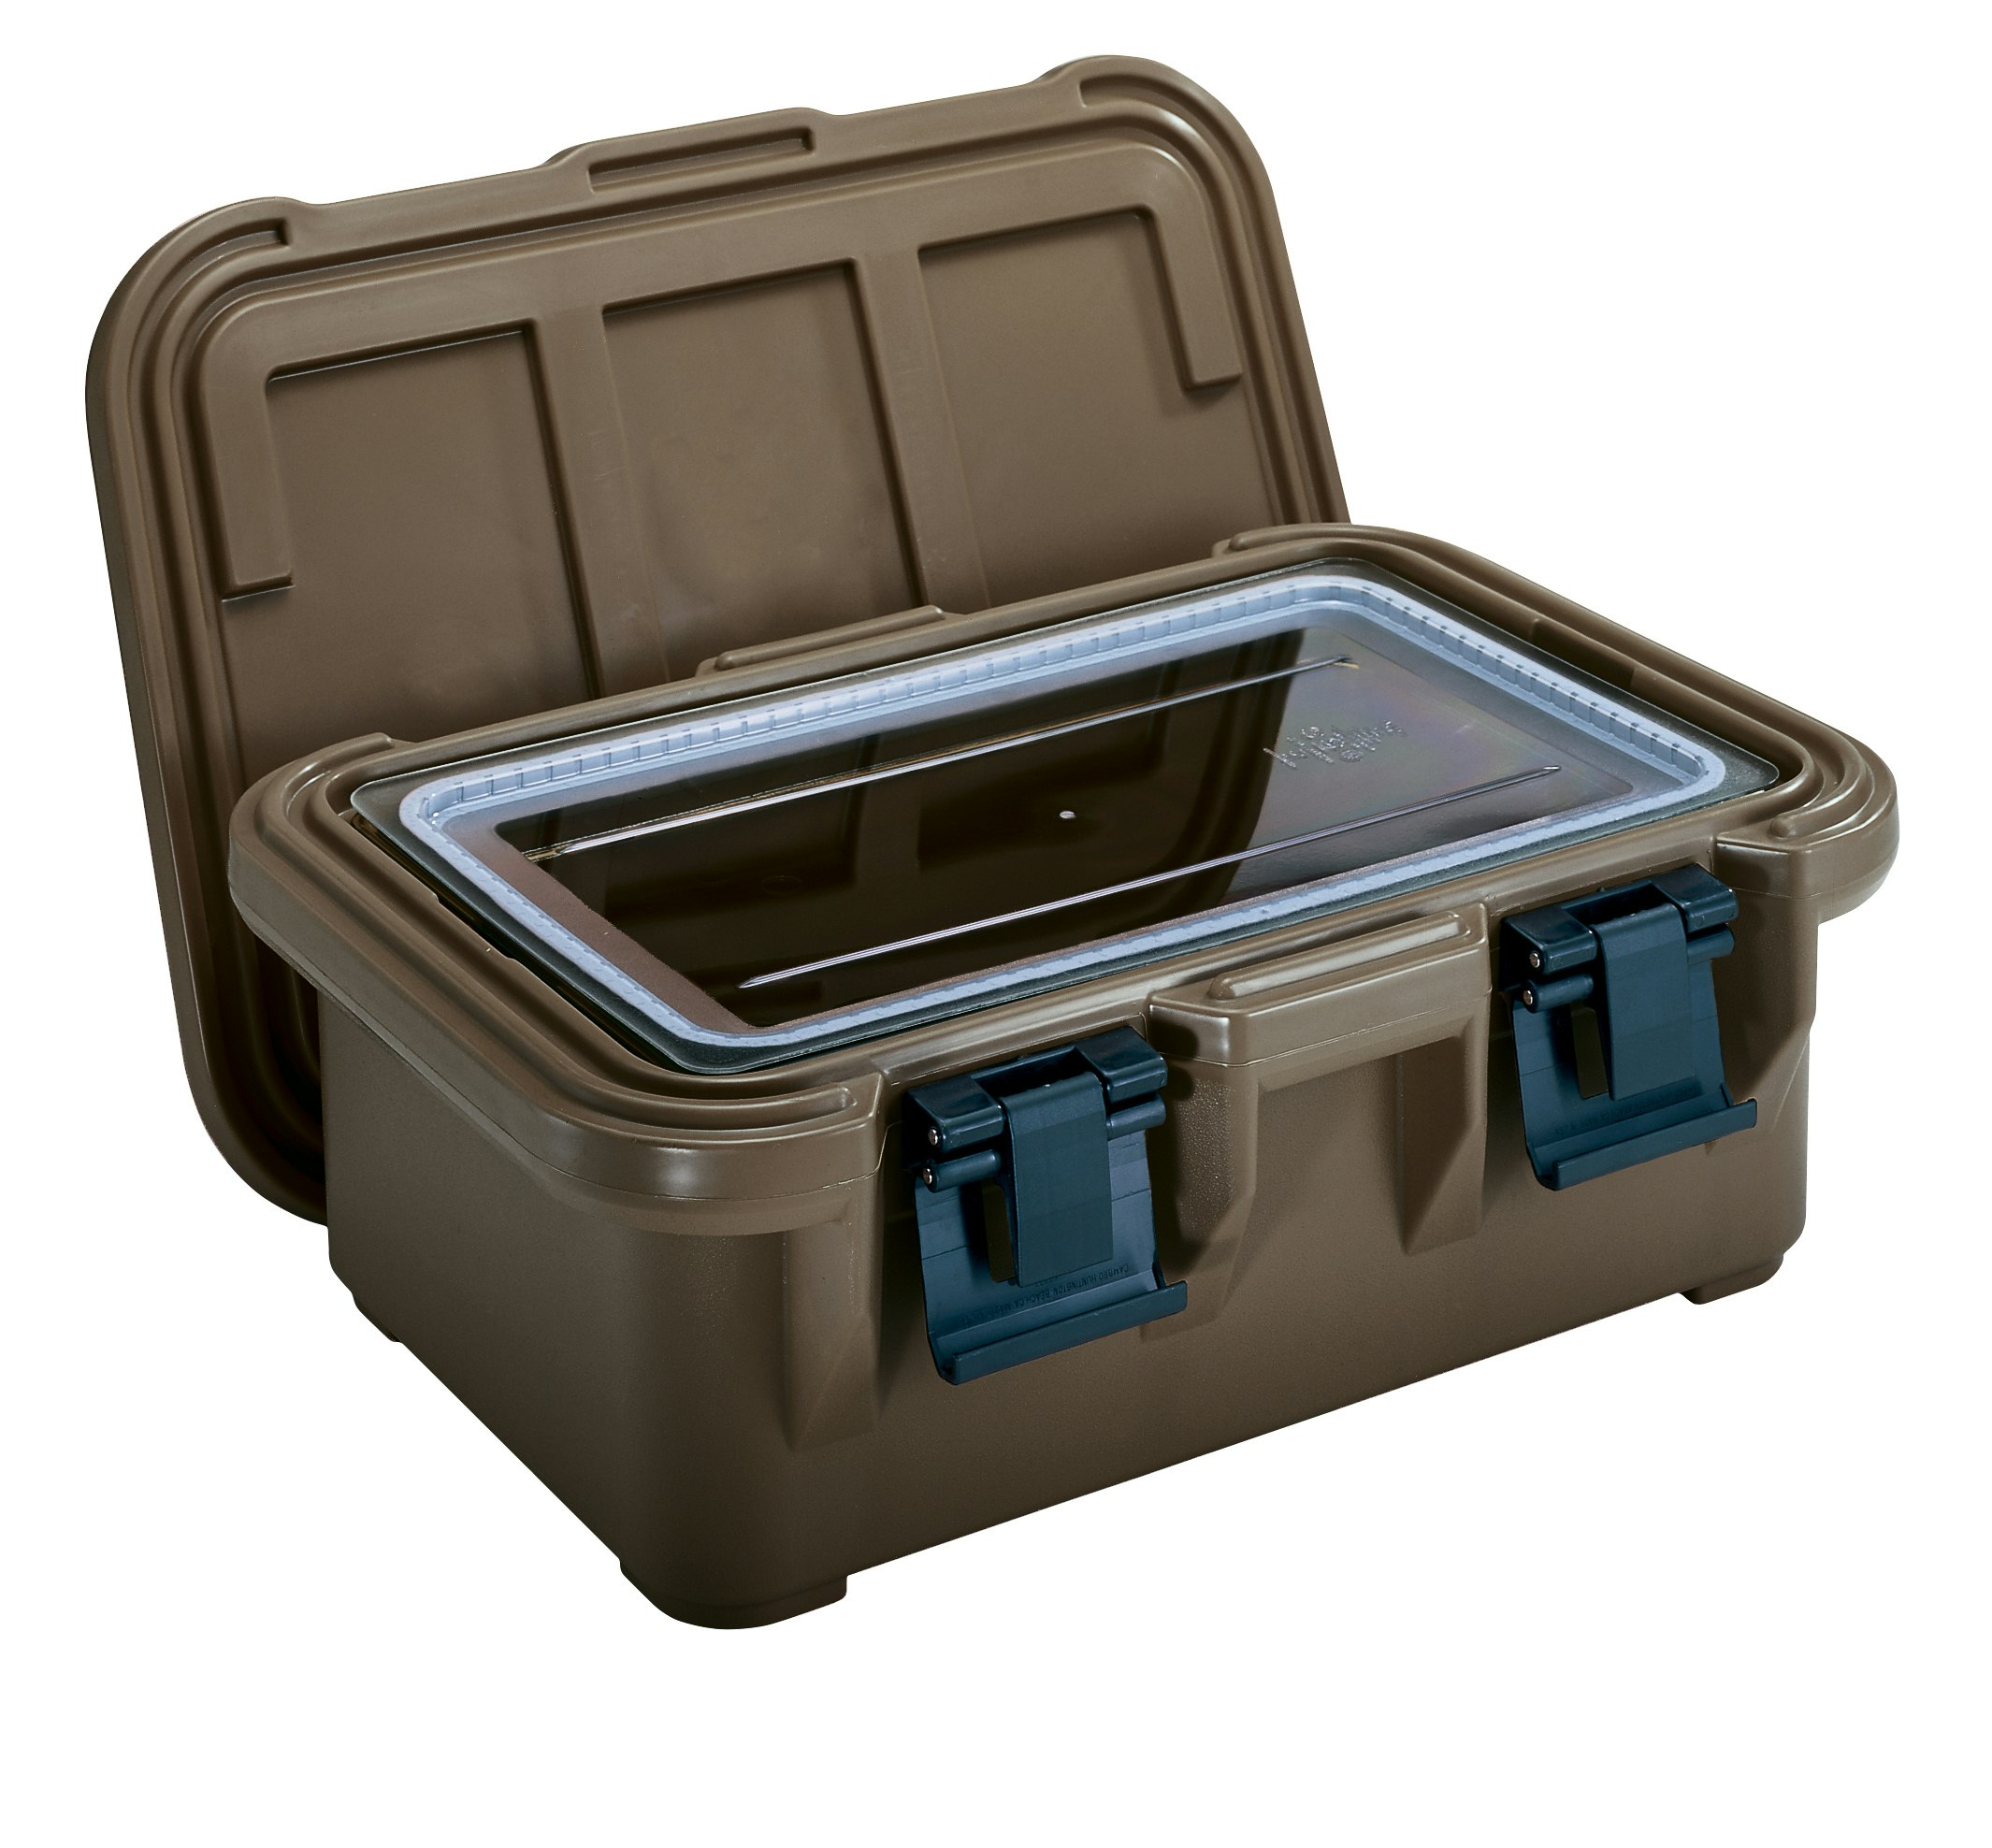 Cambro S-Series Ultra Pan Carrier, 25H x 18W 26-1-4d, Slate Blue